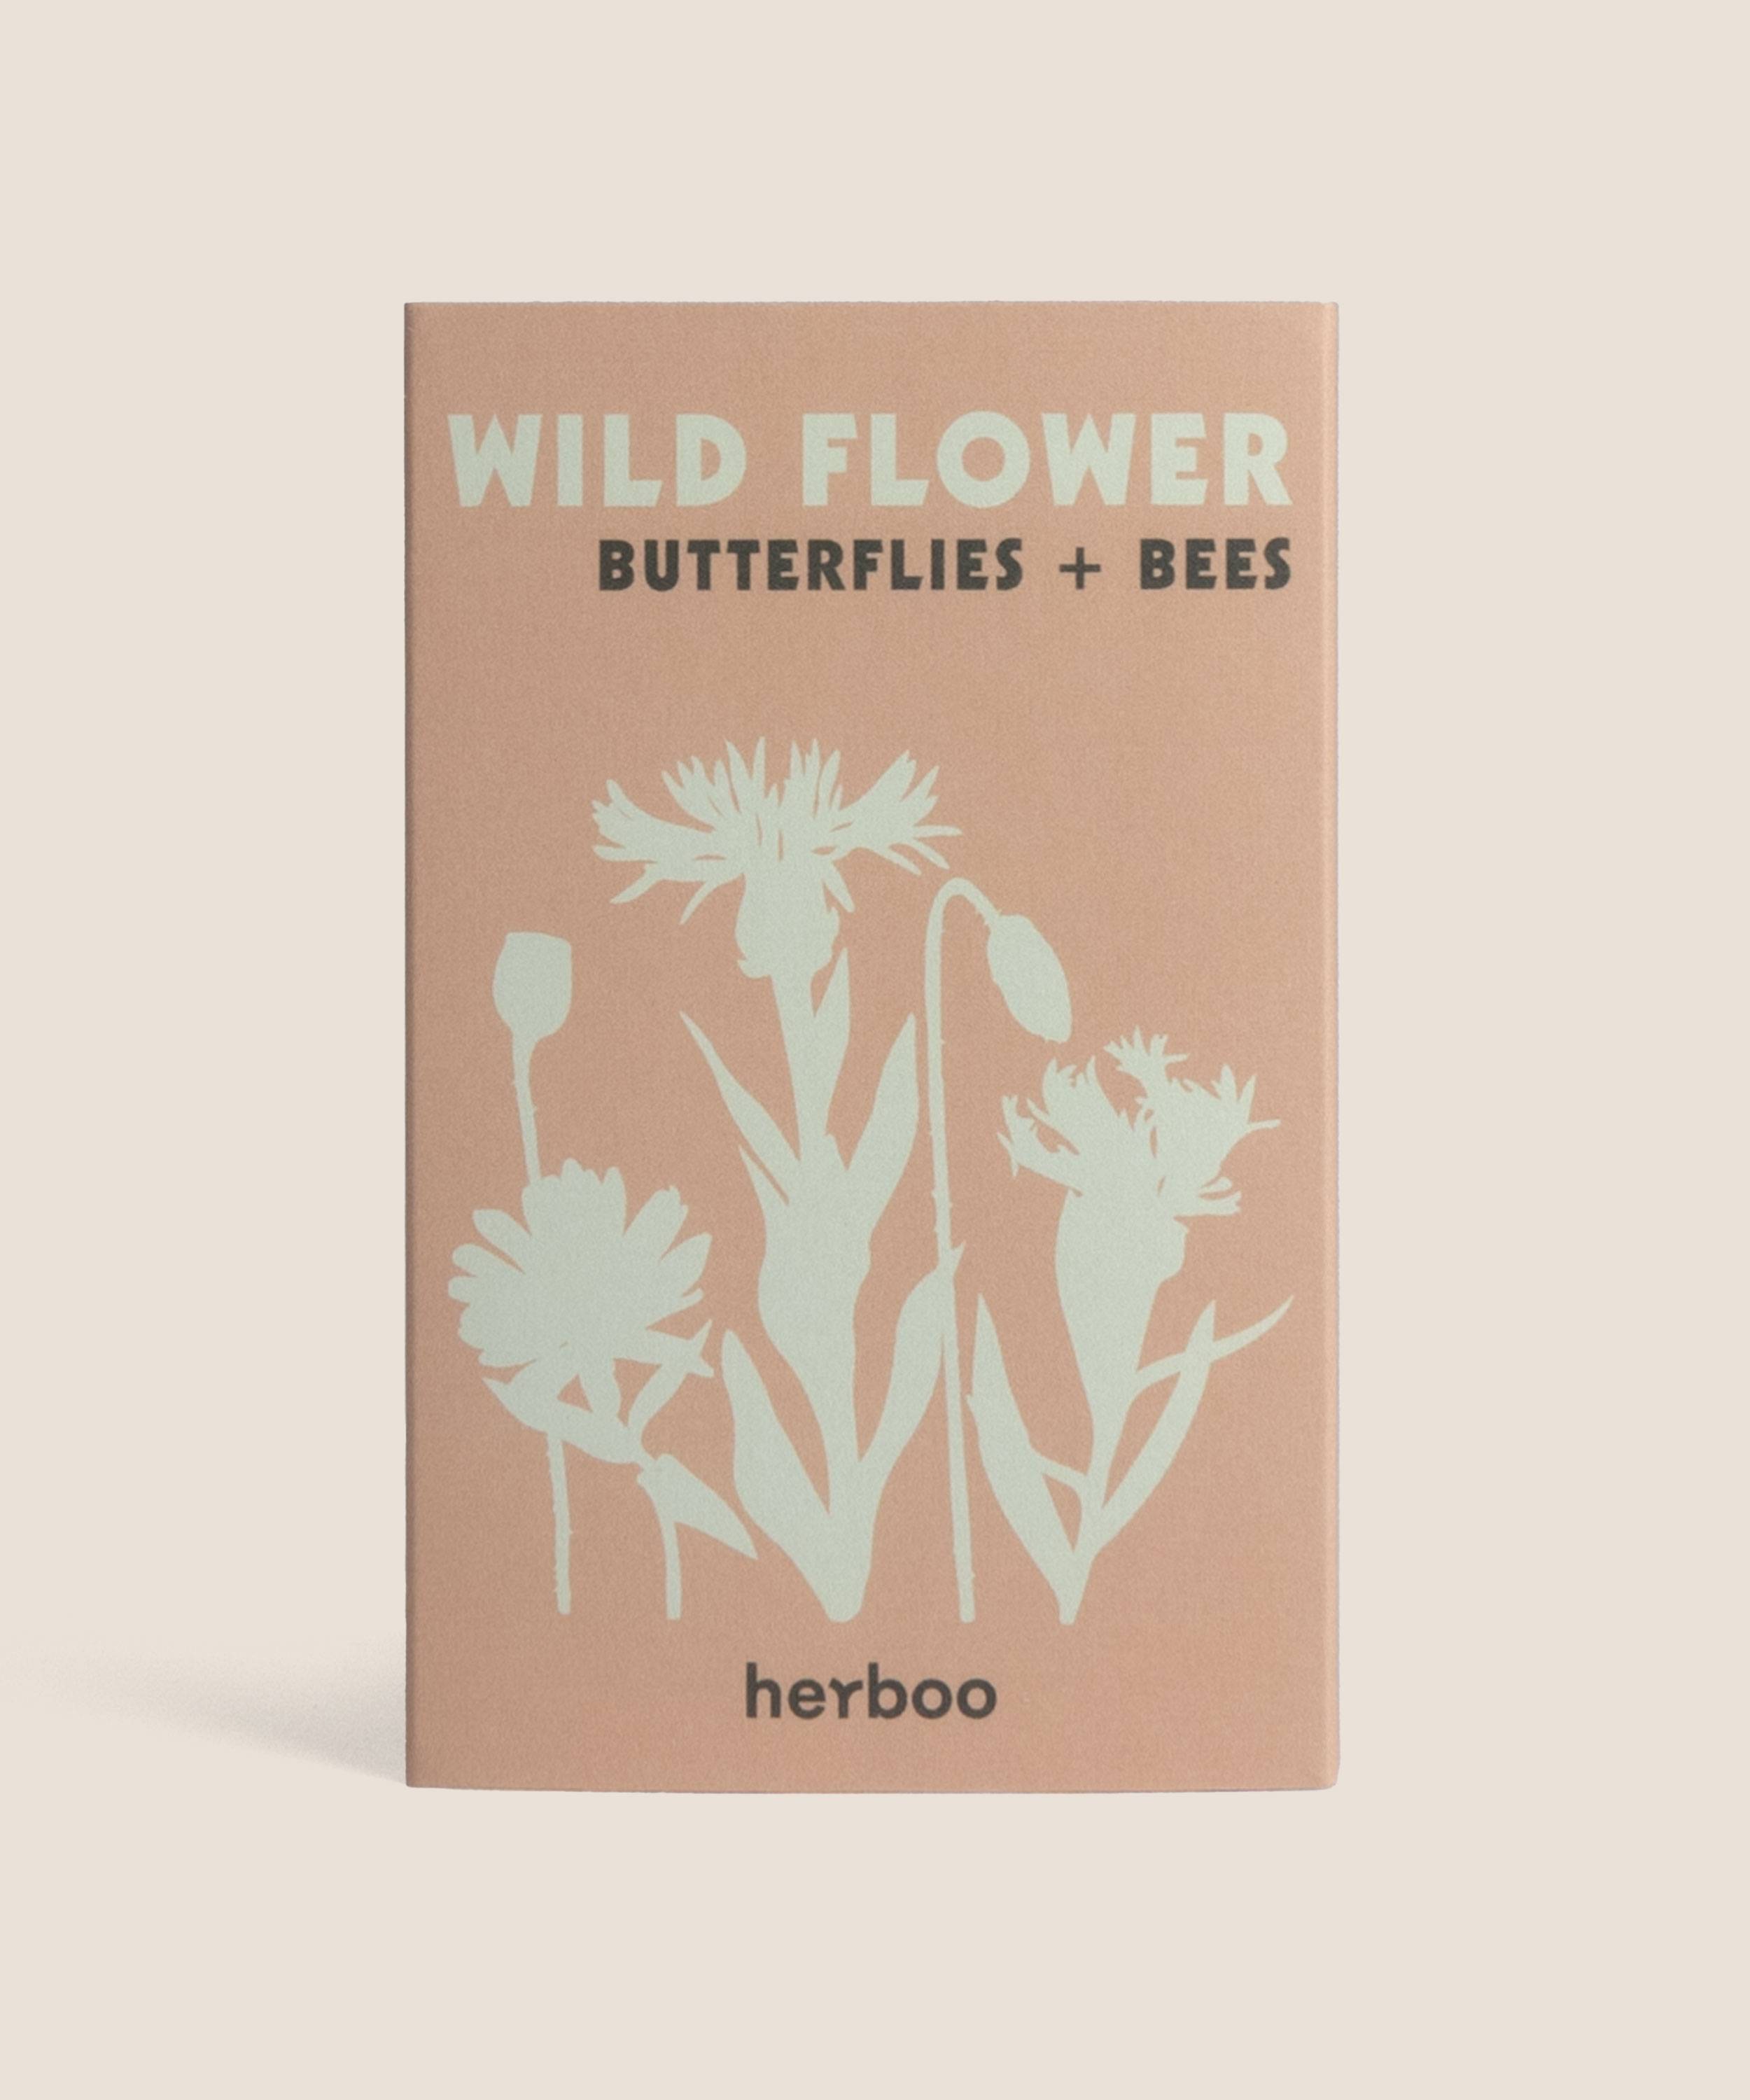 WILD FLOWER (BUTTERFLY + BEES) SEEDS BY HERBOO